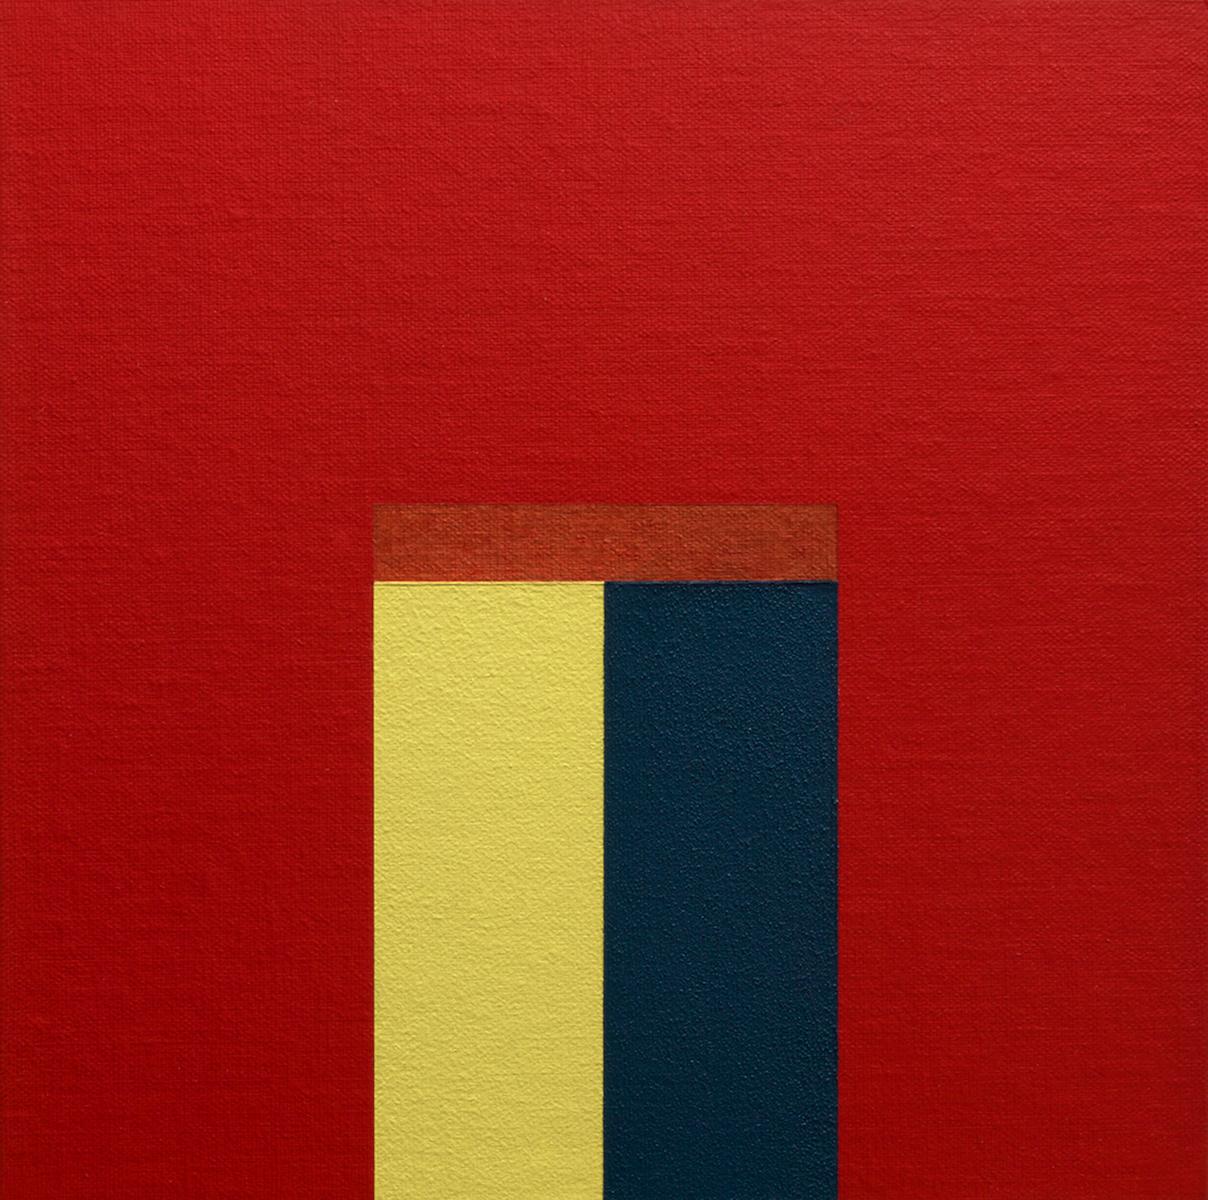 Rich Moyers Abstract Painting - TITO - Modern / Minimal Geometric Painting, Painting, Acrylic on Canvas